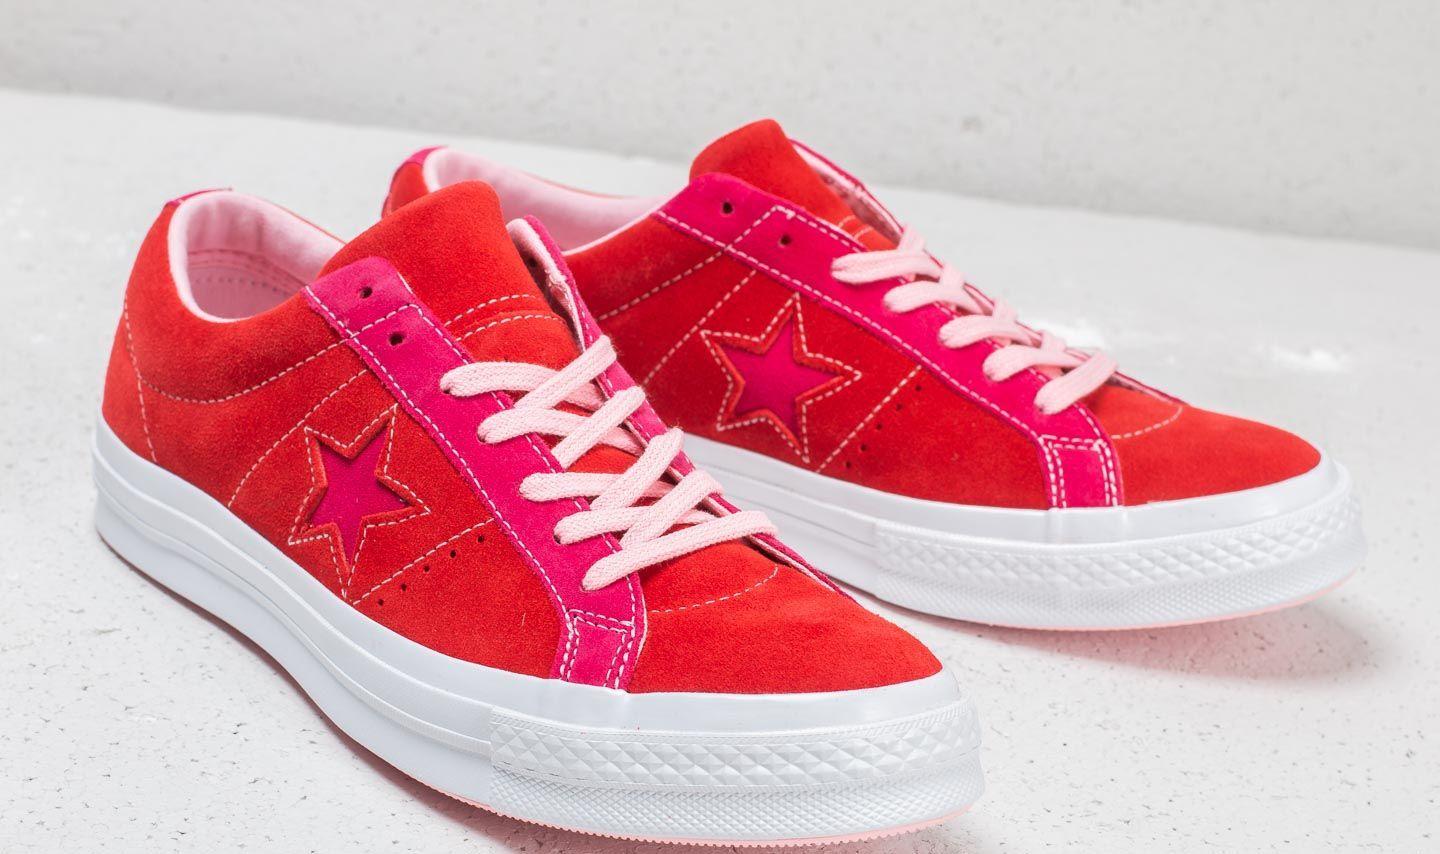 converse one star red and pink Off 76% - www.byaydinsuitehotel.com